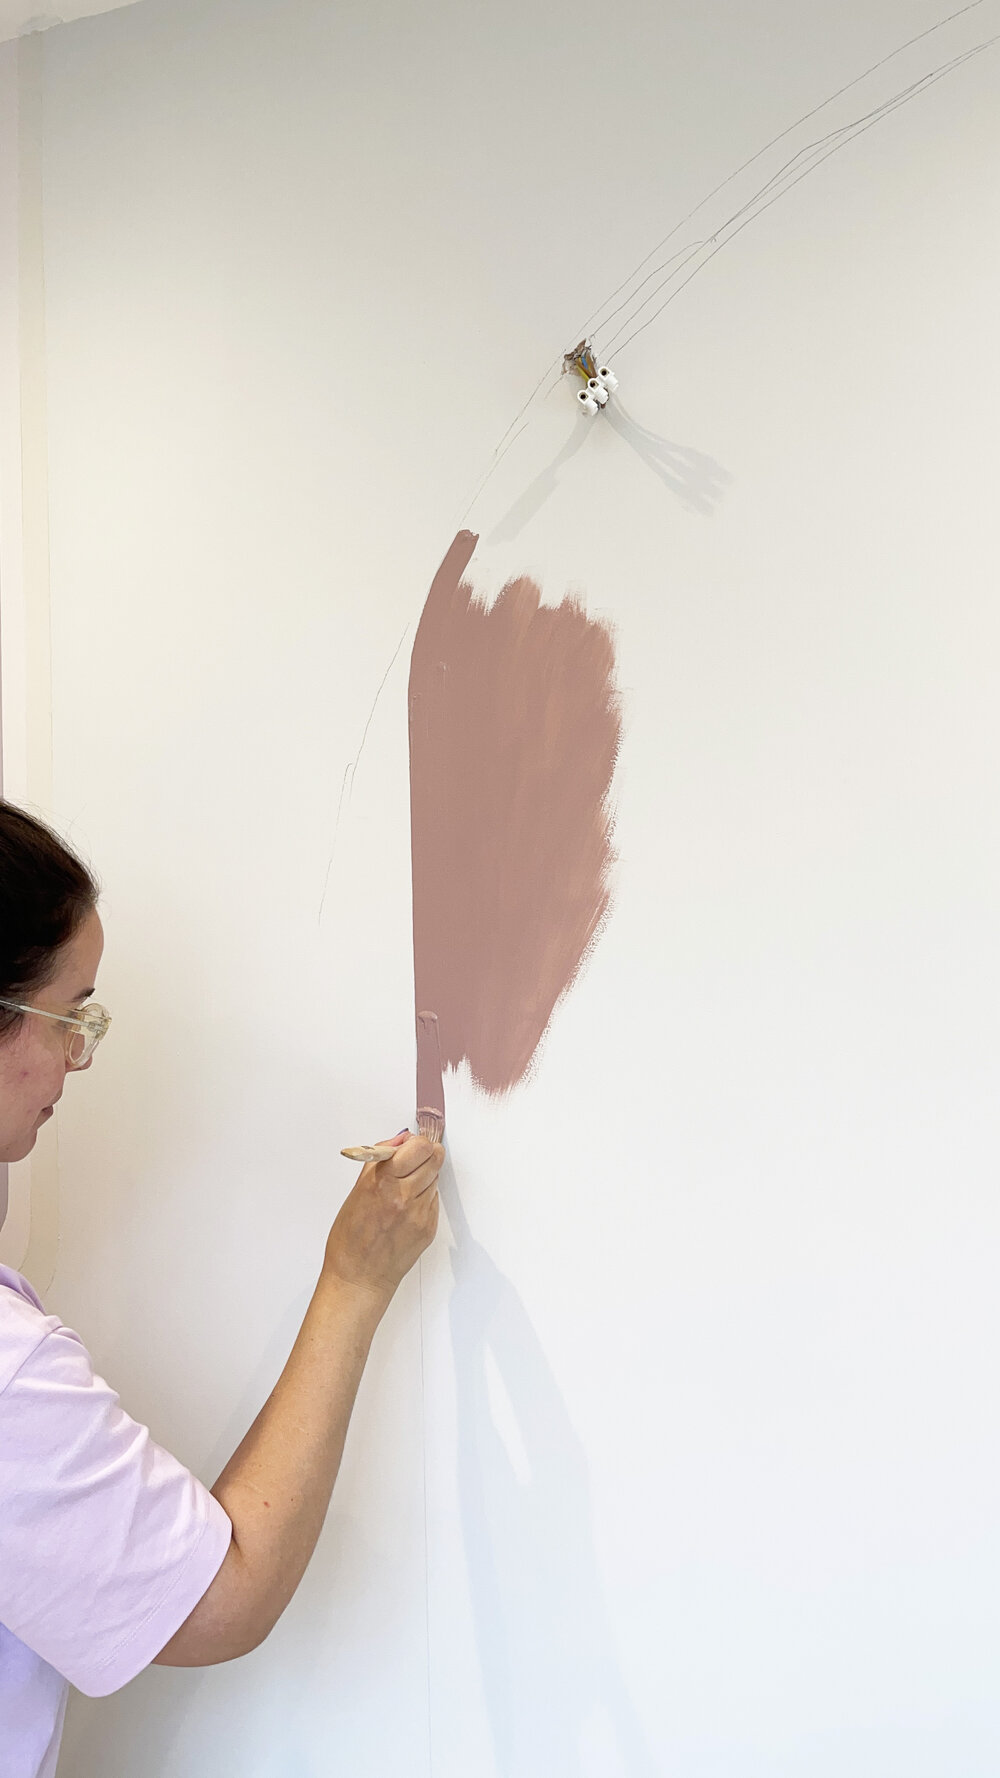 How to create a painted wall mural, inspired by Dulux Changing Rooms